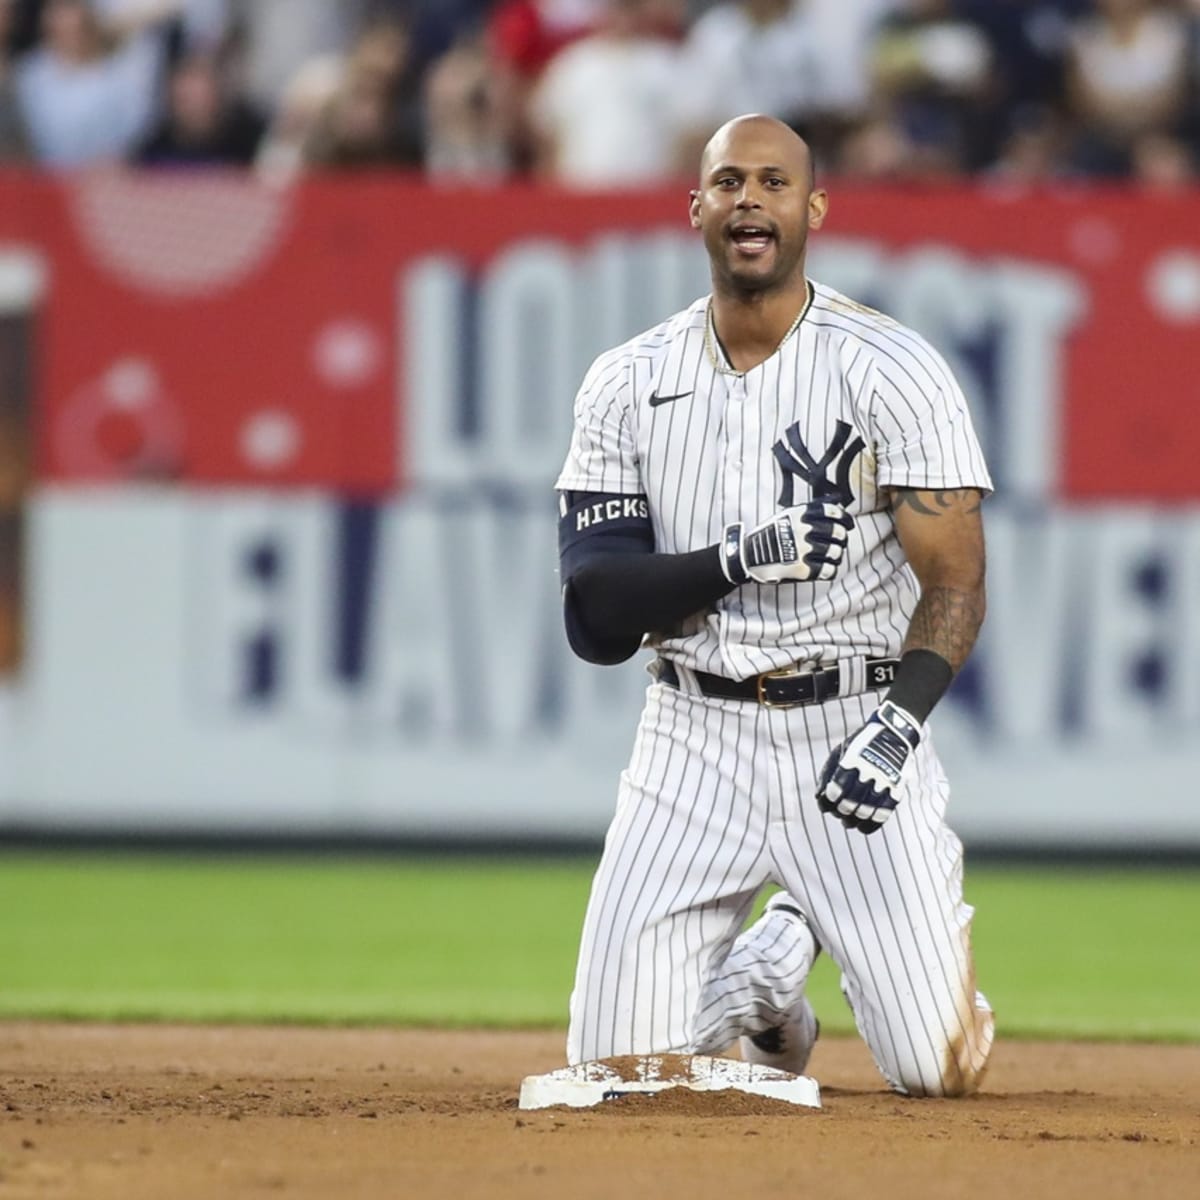 Aaron Hicks has taken to leftfield nicely for Yankees - Newsday